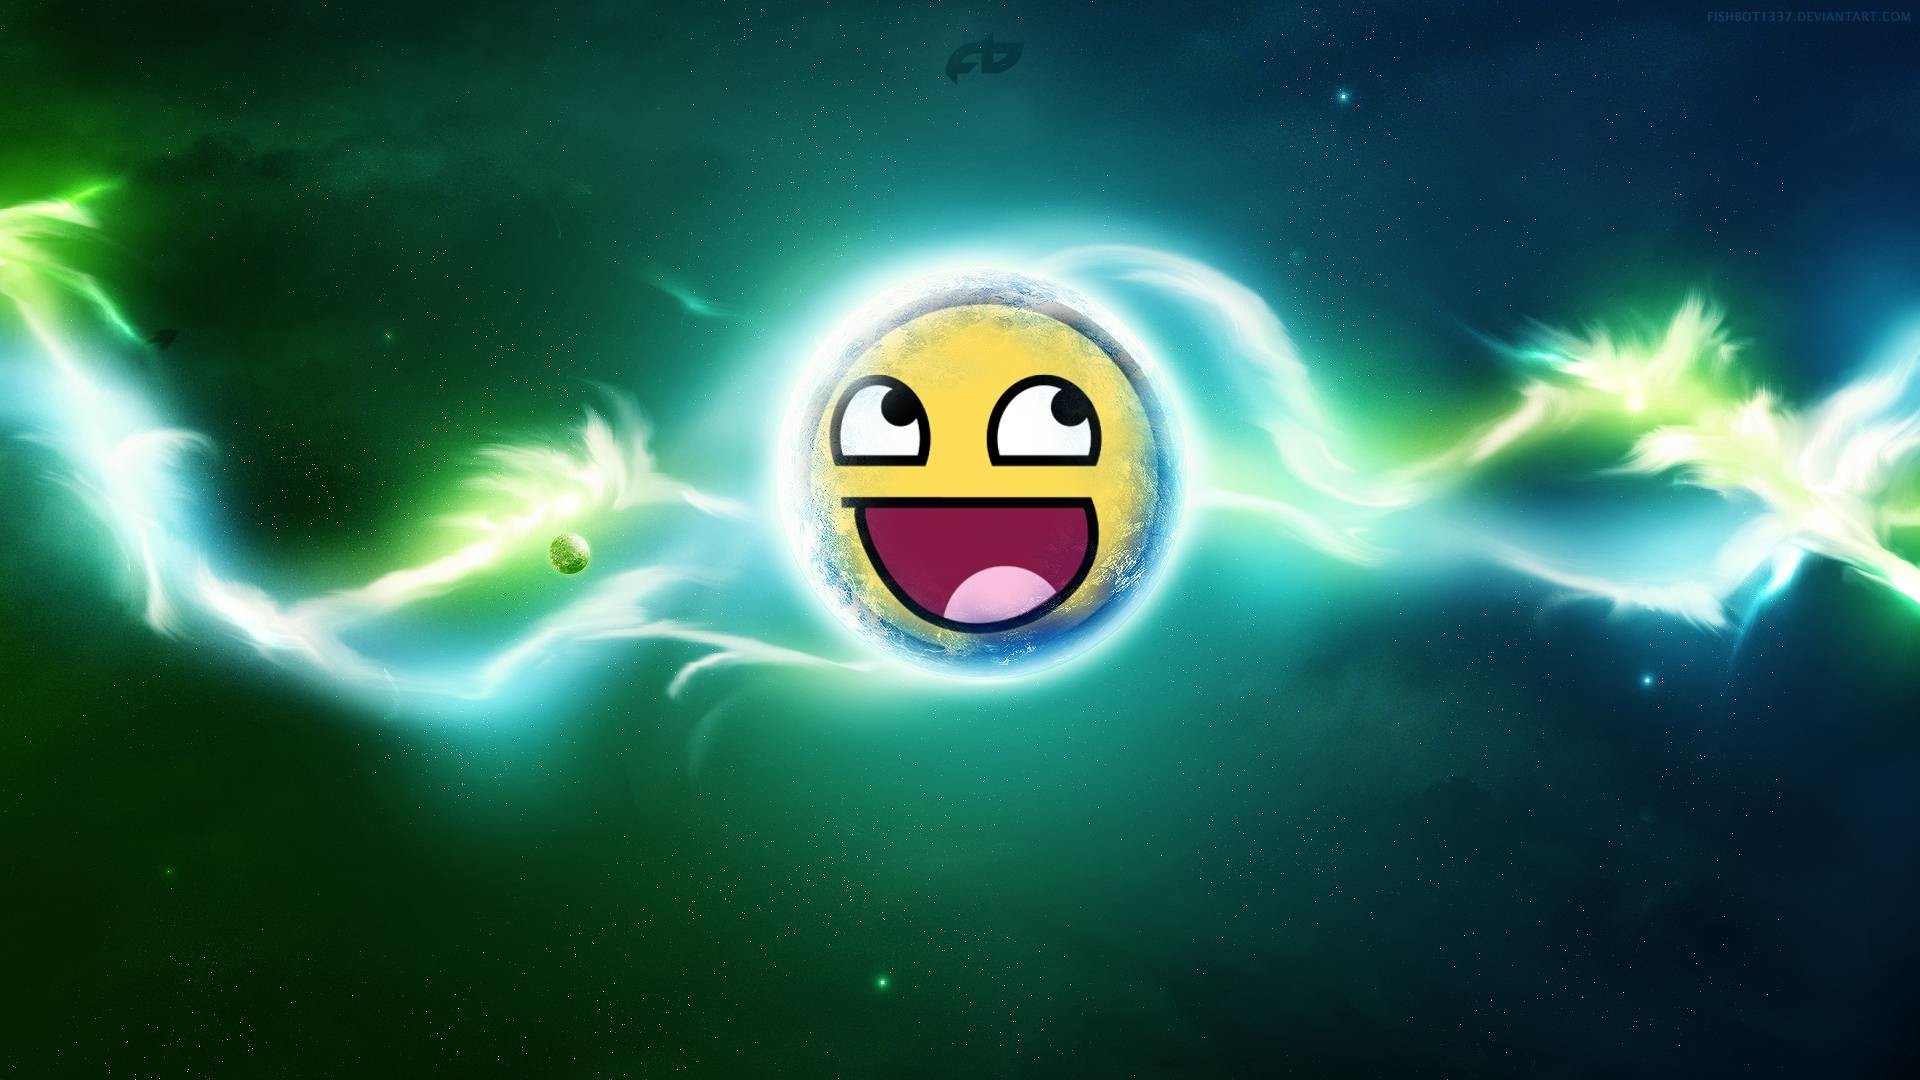 1920x1080 Res: , free smiley face wallpaper | awesome ...